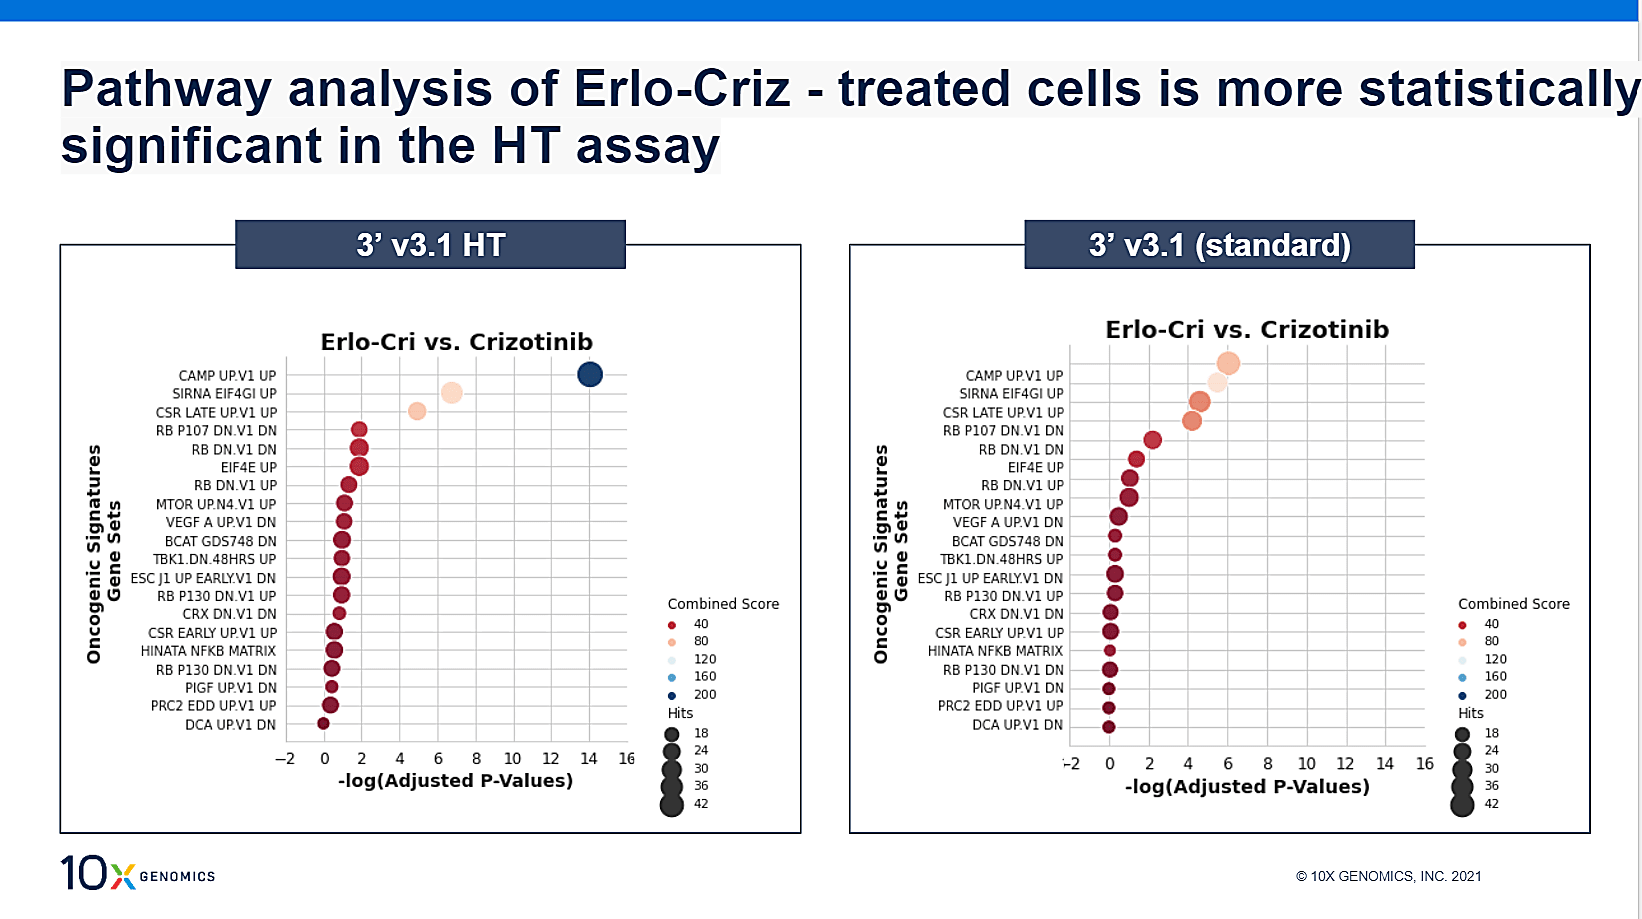 Gene set enrichment analysis (GSEA) of a selection of the top-ranked 1,000 genes, as determined based on literature and common understanding of gene functions in cell cycle pathways. Dot plots are shown for data from the standard and HT assays.